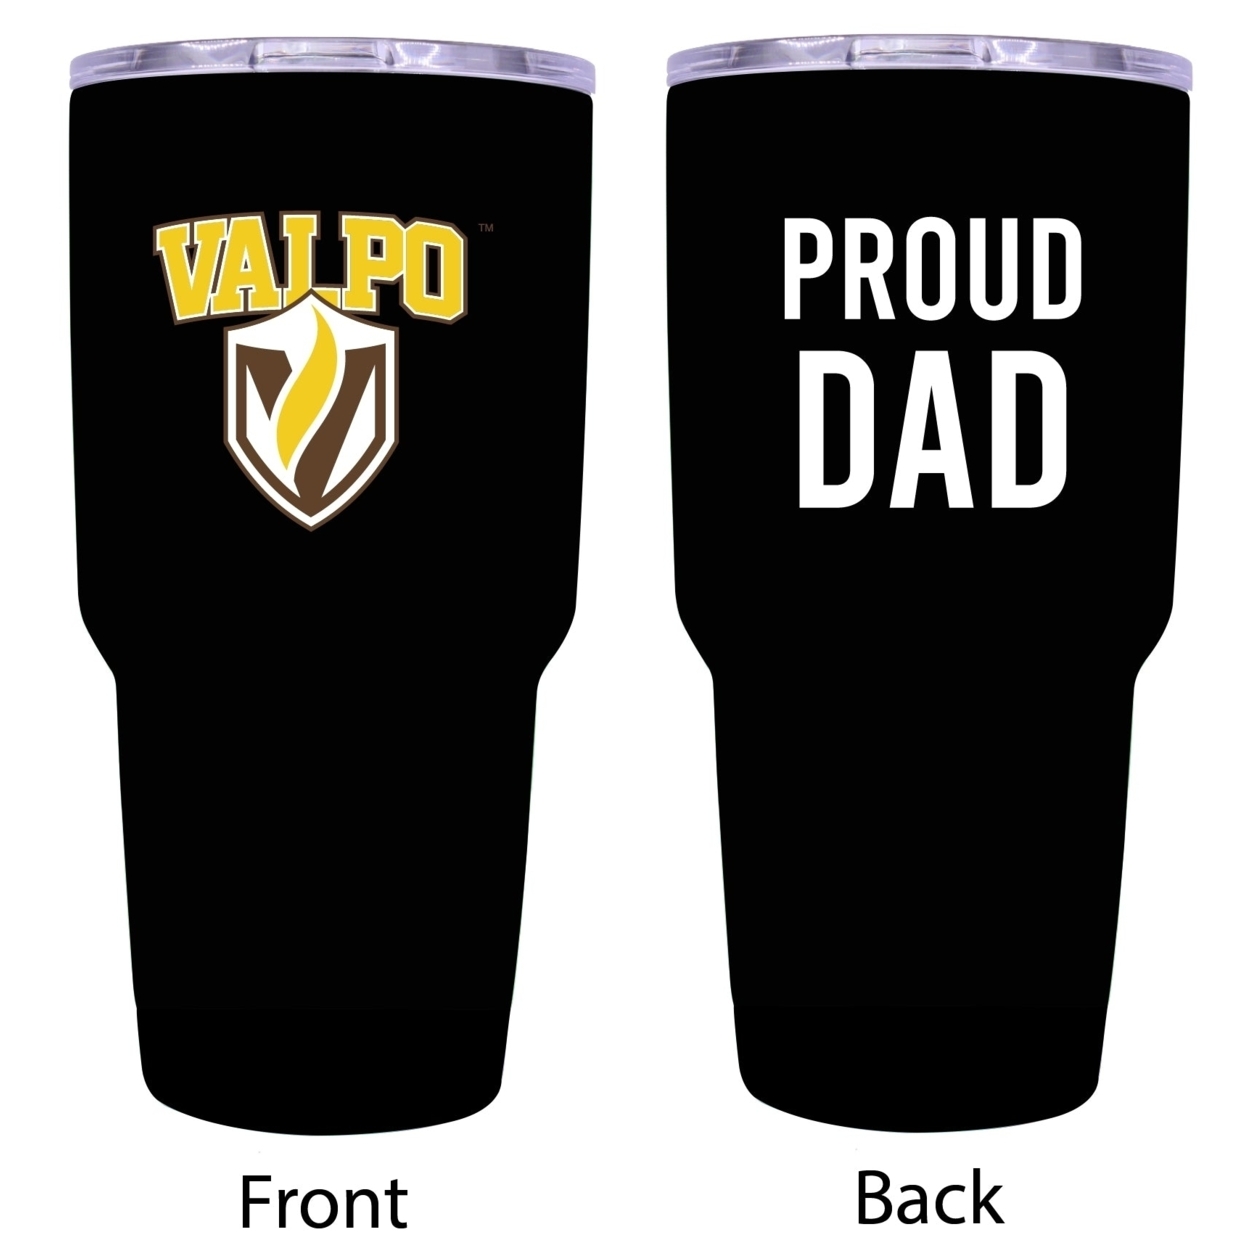 Valparaiso University Proud Dad 24 Oz Insulated Stainless Steel Tumblers Choose Your Color. - Black